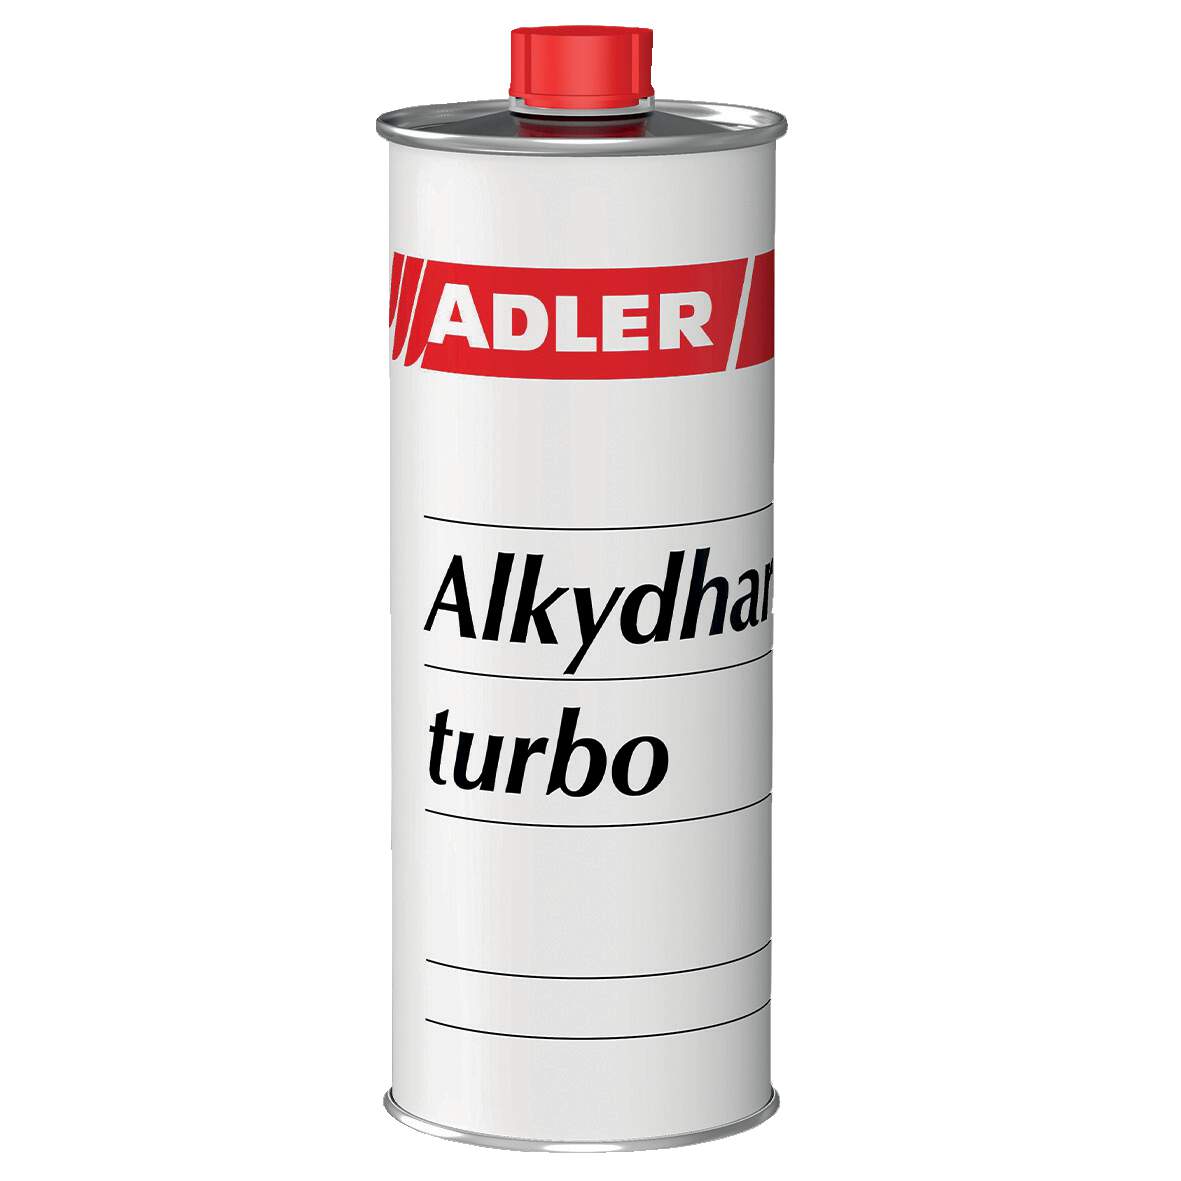 1230591 - Alkydharzturbo